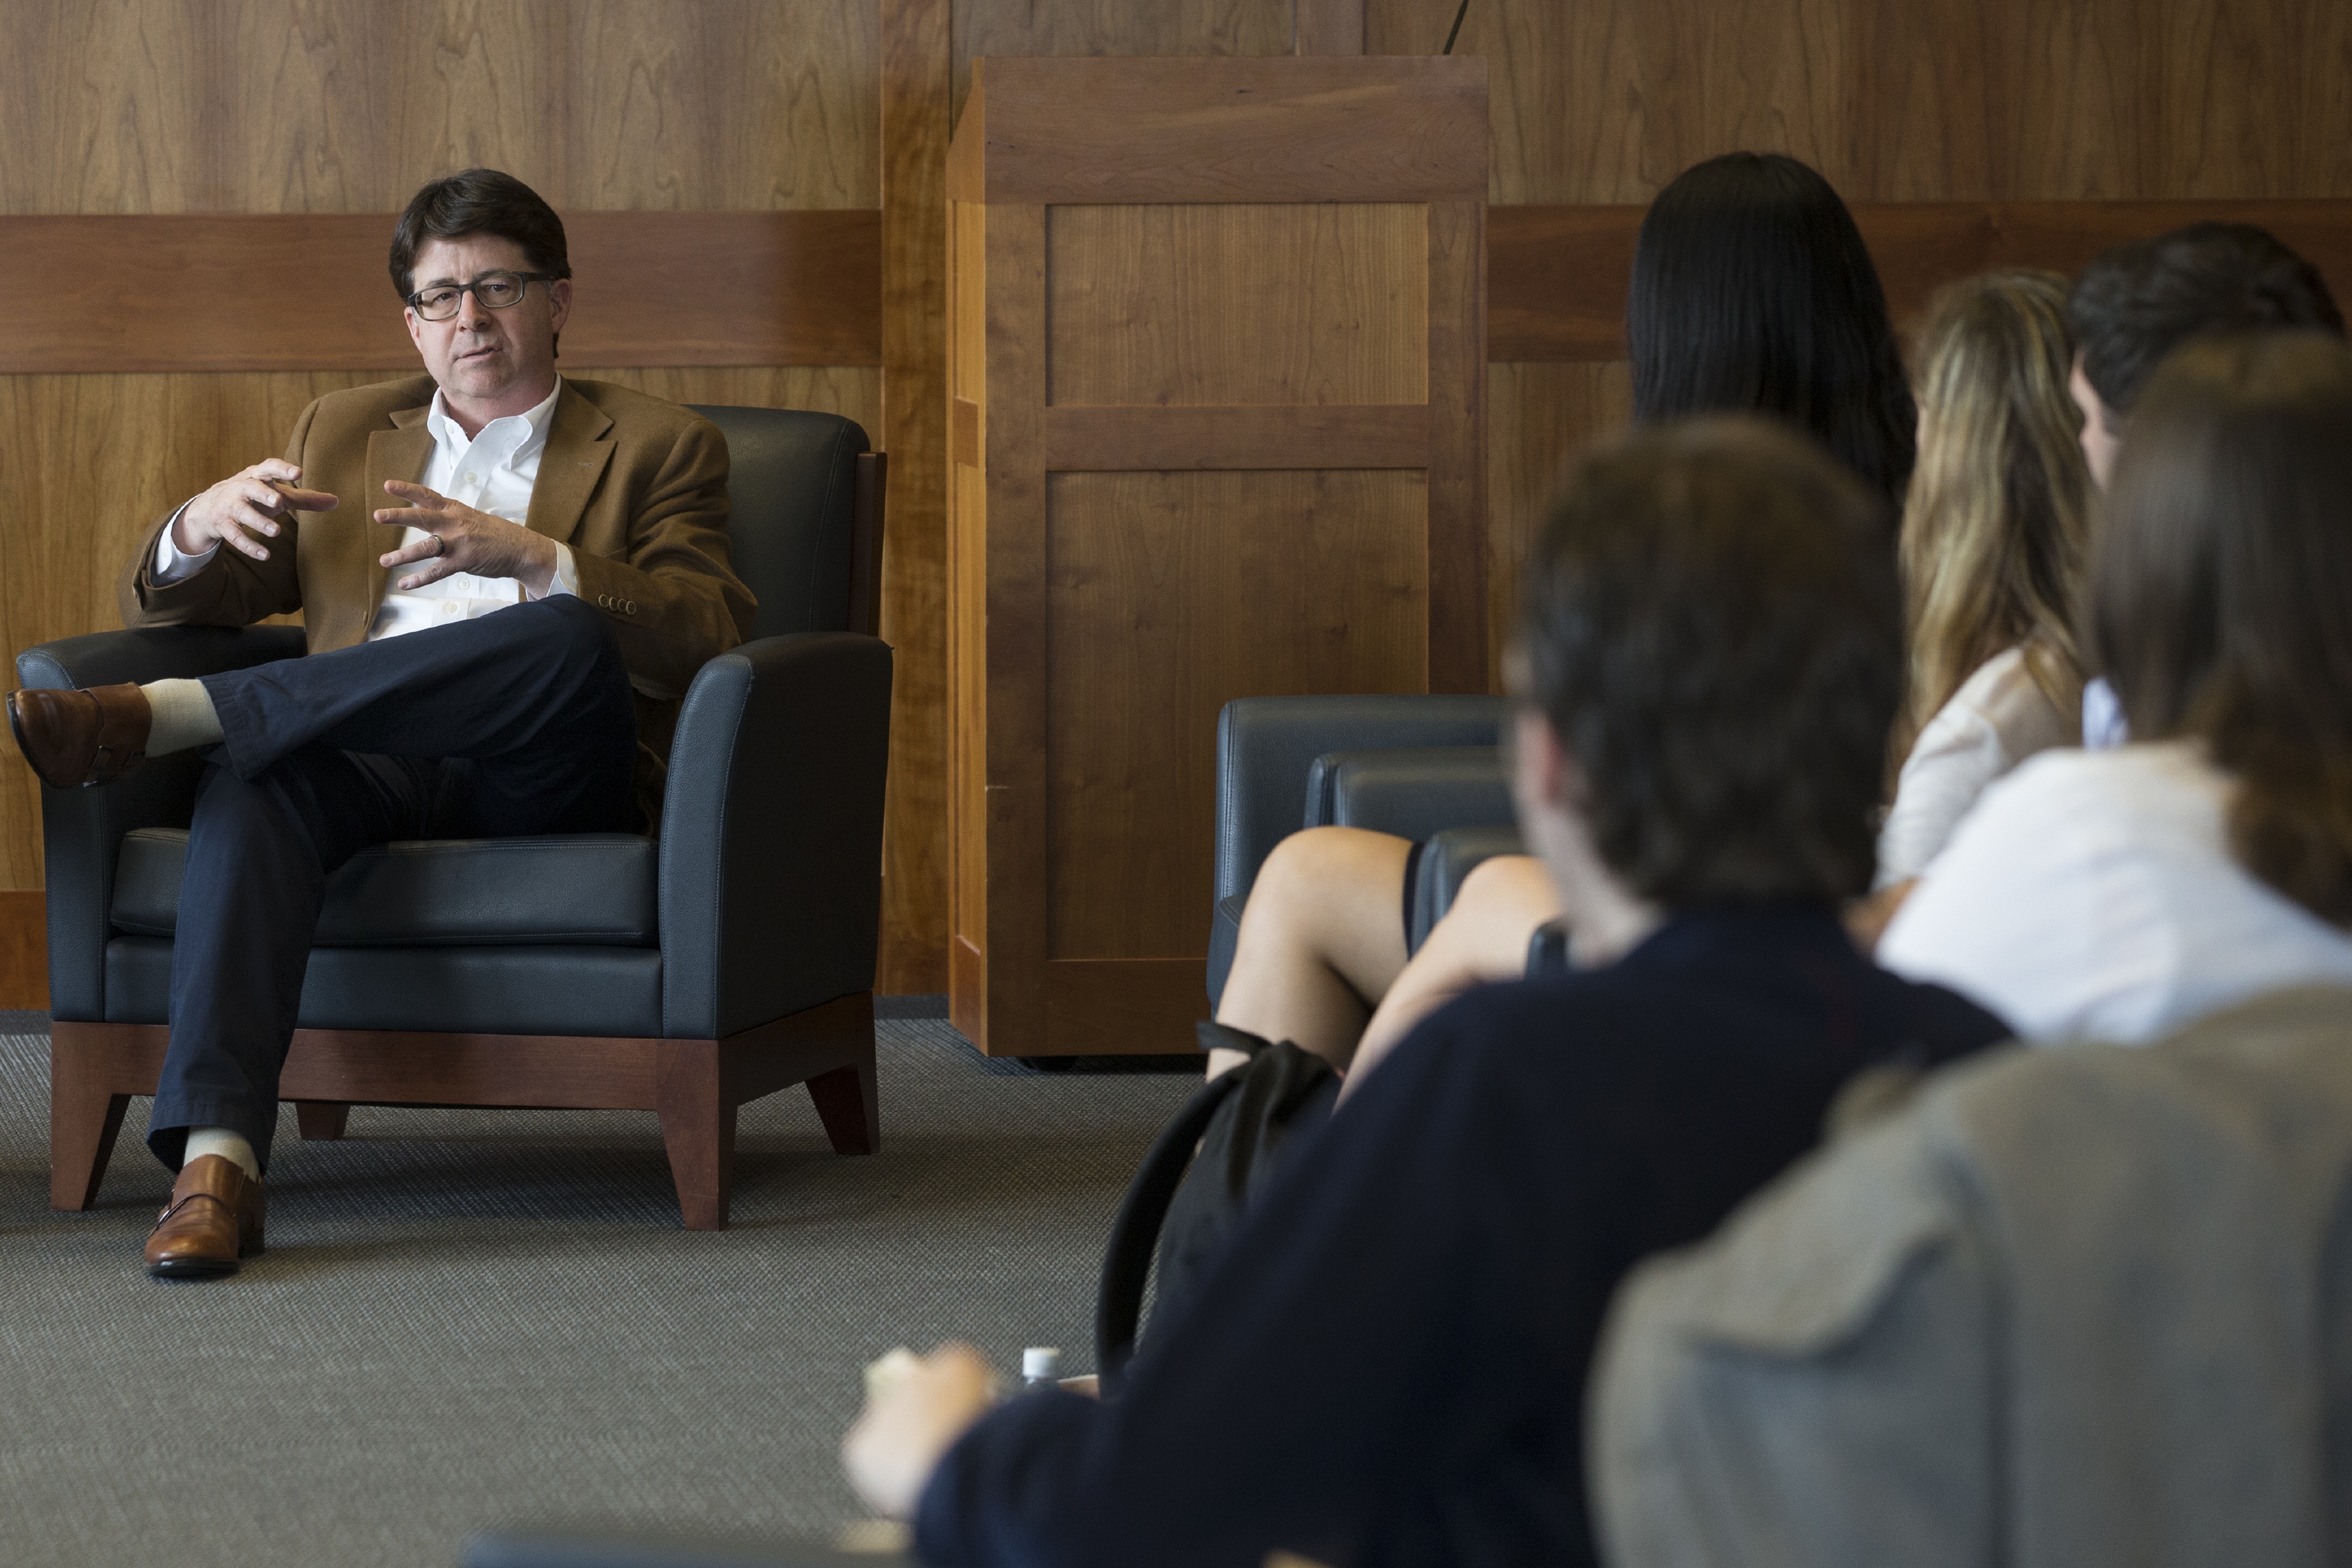 Dean Strang talking to a group of students